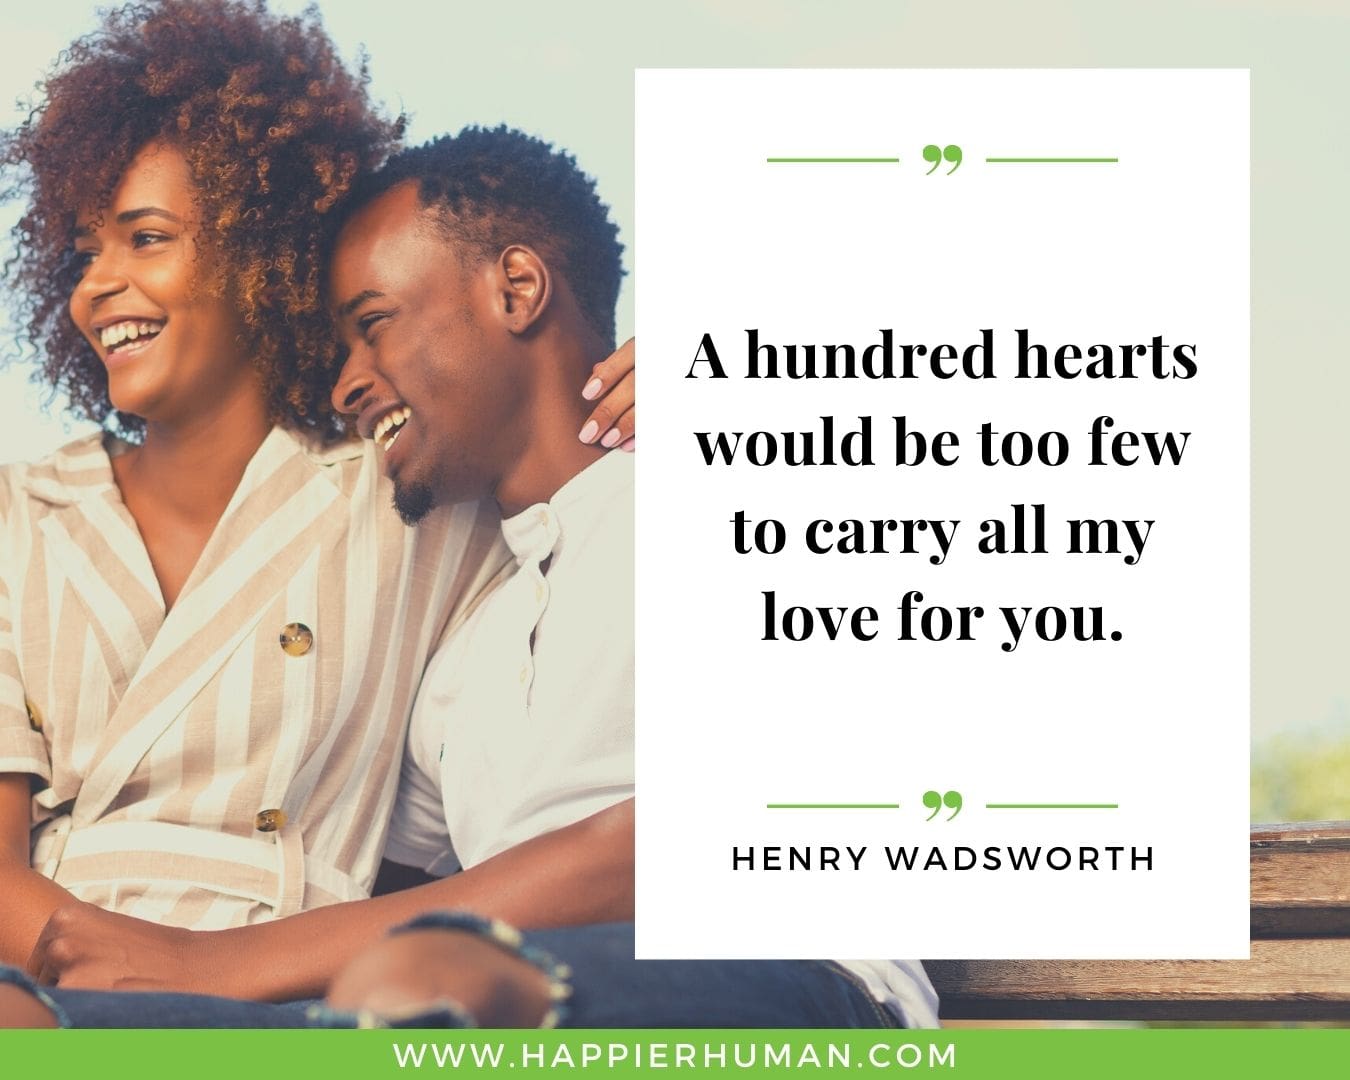 Messages of Love to show her you care - “A hundred hearts would be too few to carry all my love for you.” – Henry Wadsworth